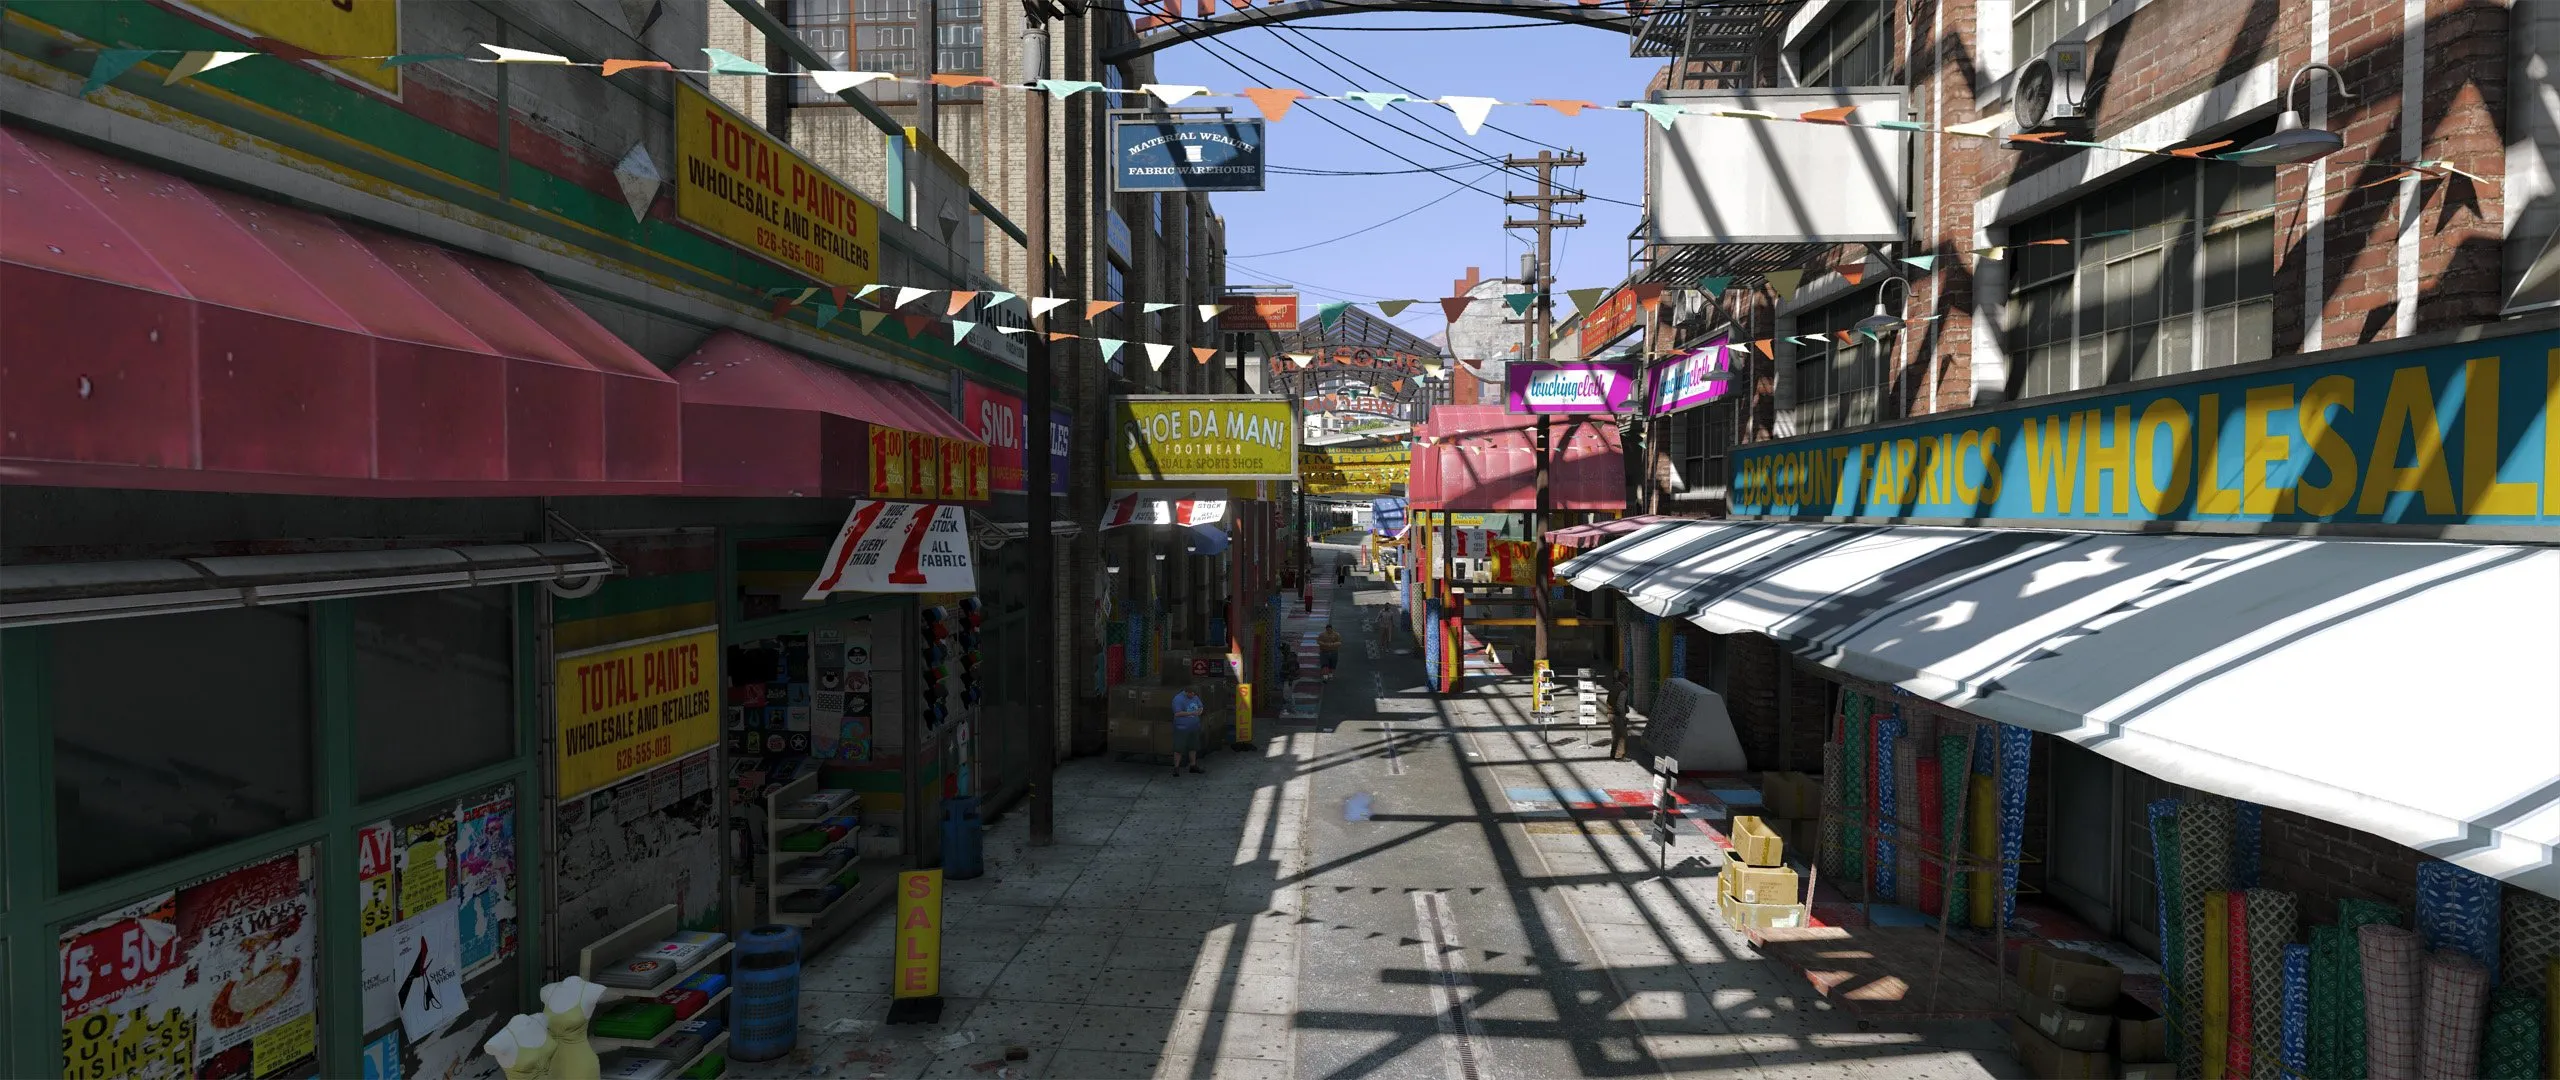 New GTA V Mod Pushes Photorealistic Graphics To the Next Level #4